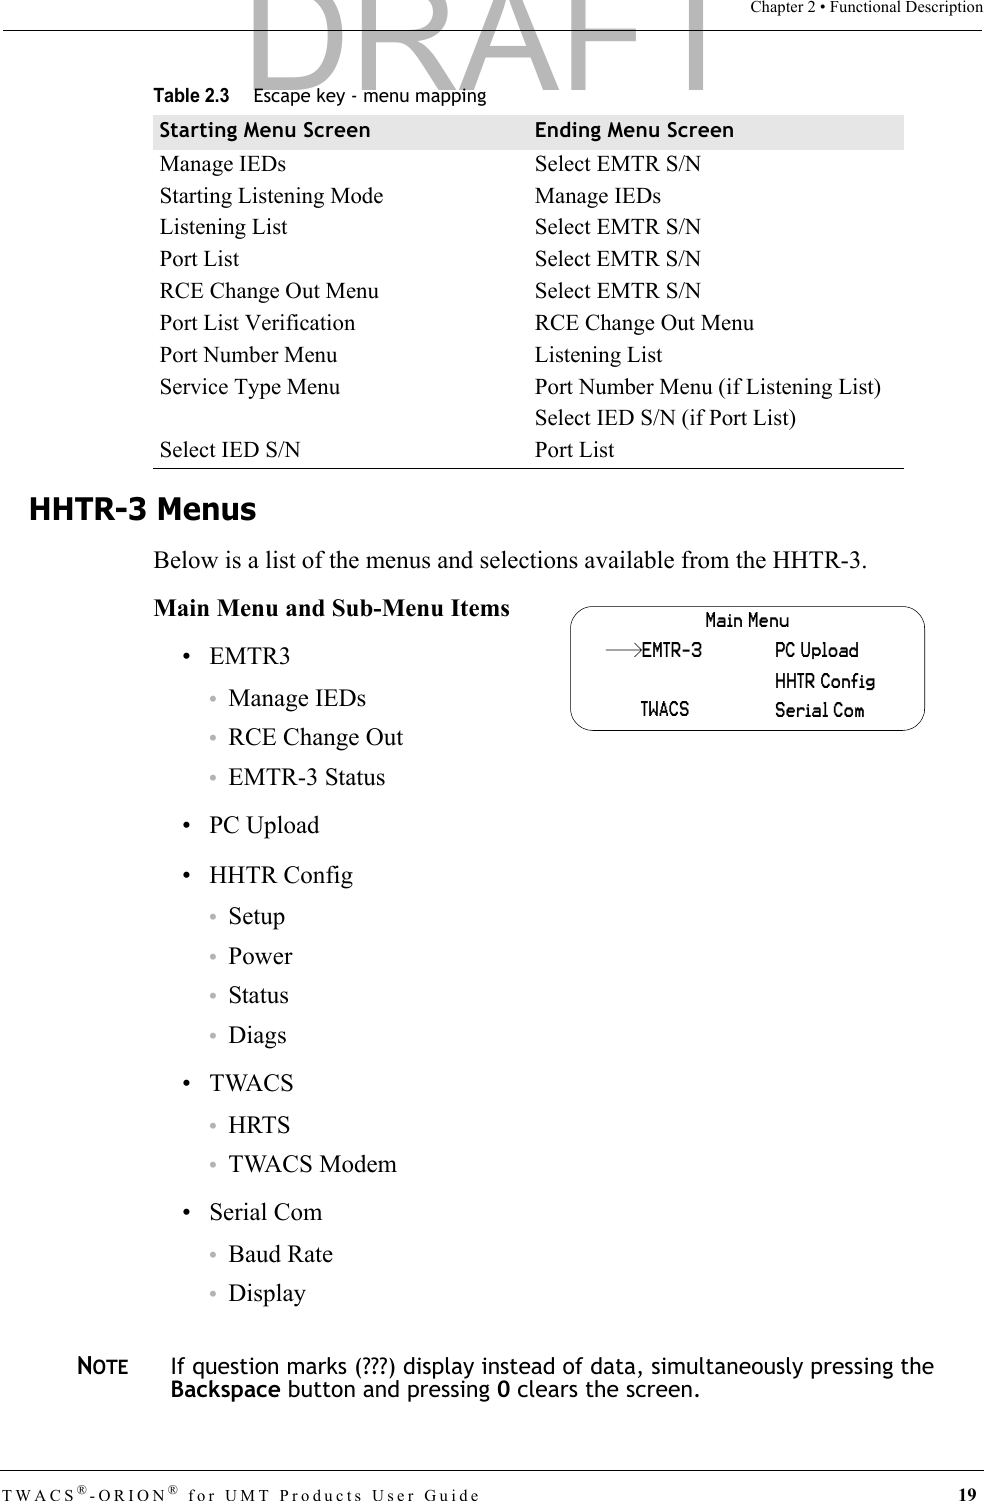 TWACS®-ORION® for UMT Products User Guide 19Chapter 2 • Functional DescriptionHHTR-3 MenusBelow is a list of the menus and selections available from the HHTR-3.Main Menu and Sub-Menu Items•EMTR3•Manage IEDs•RCE Change Out•EMTR-3 Status•PC Upload • HHTR Config•Setup•Power•Status•Diags•TWACS•HRTS•TWACS Modem•Serial Com•Baud Rate•DisplayNOTEIf question marks (???) display instead of data, simultaneously pressing the Backspace button and pressing 0 clears the screen.Manage IEDs Select EMTR S/NStarting Listening Mode Manage IEDsListening List Select EMTR S/NPort List Select EMTR S/NRCE Change Out Menu Select EMTR S/NPort List Verification RCE Change Out MenuPort Number Menu Listening ListService Type Menu Port Number Menu (if Listening List)Select IED S/N (if Port List)Select IED S/N Port ListTable 2.3Escape key - menu mappingStarting Menu Screen Ending Menu ScreenMain MenuTWACSHHTR ConfigSerial ComPC UploadEMTR-3DRAFT